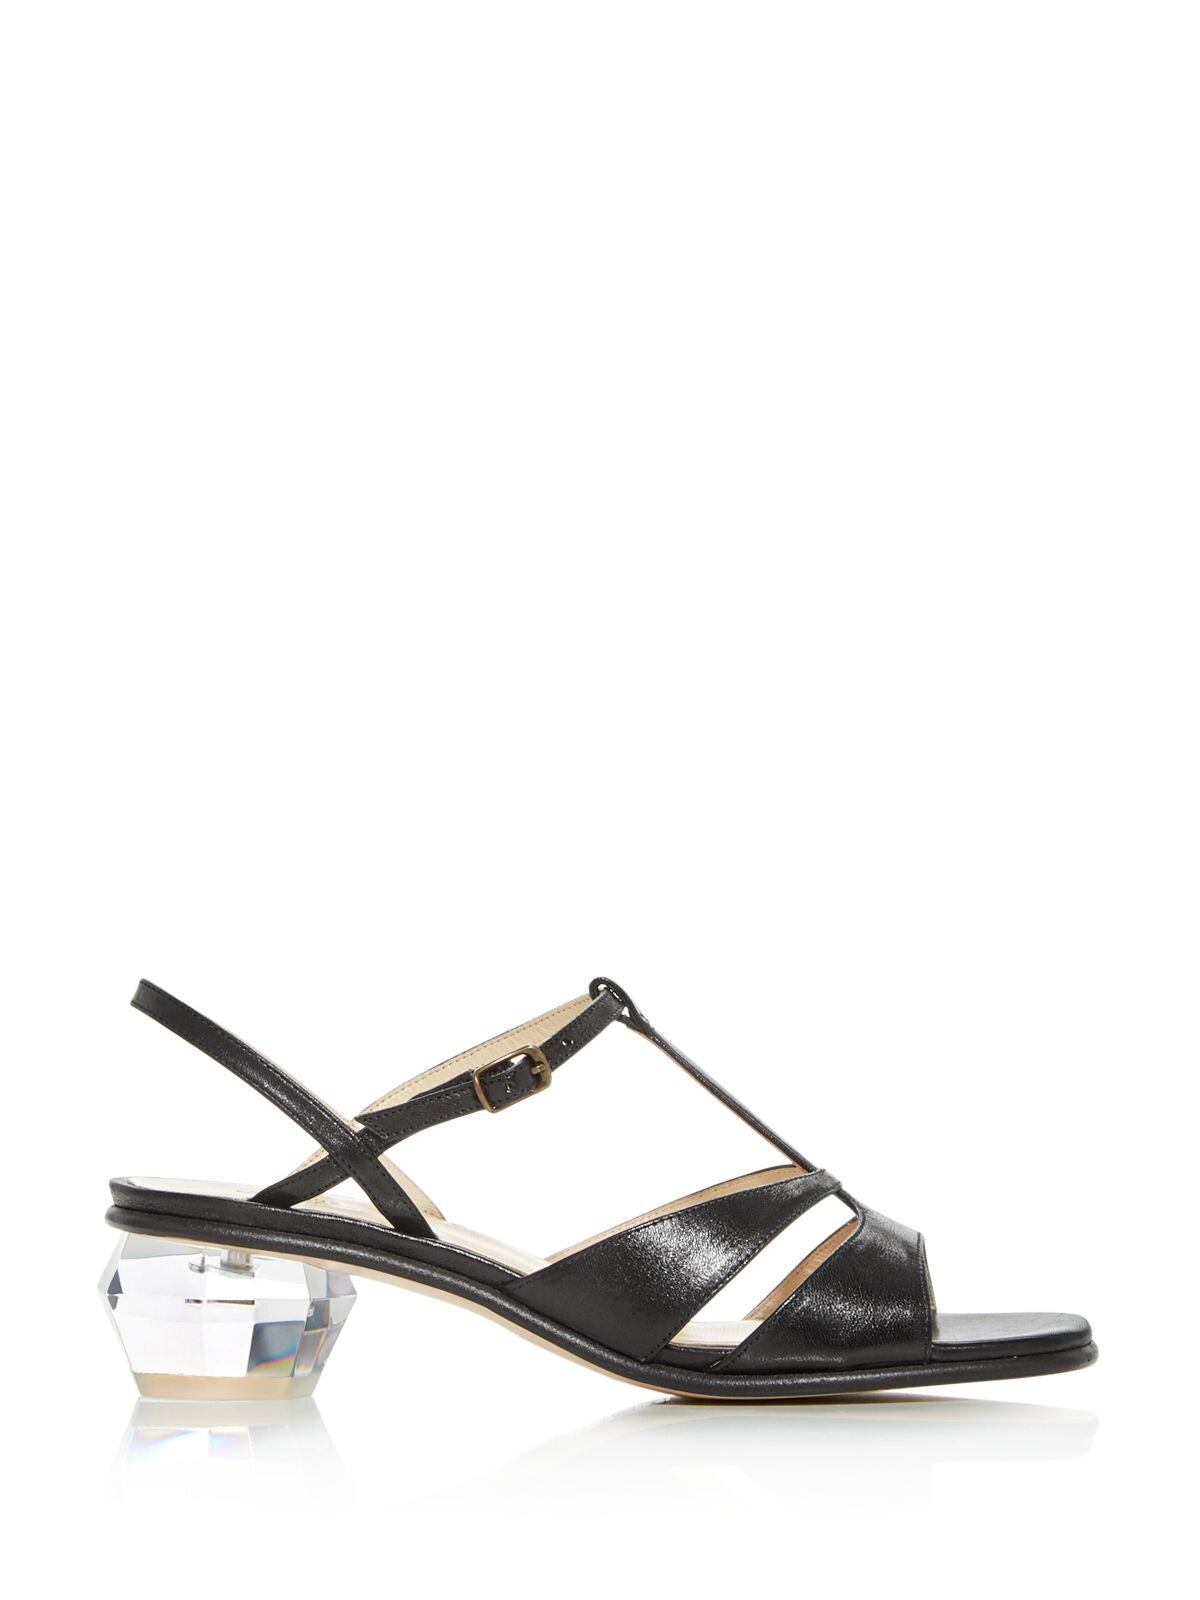 MARC JACOBS Womens Black T-Strap Strappy The Gem Square Toe Sculpted Heel Buckle Leather Slingback Sandal 38.5